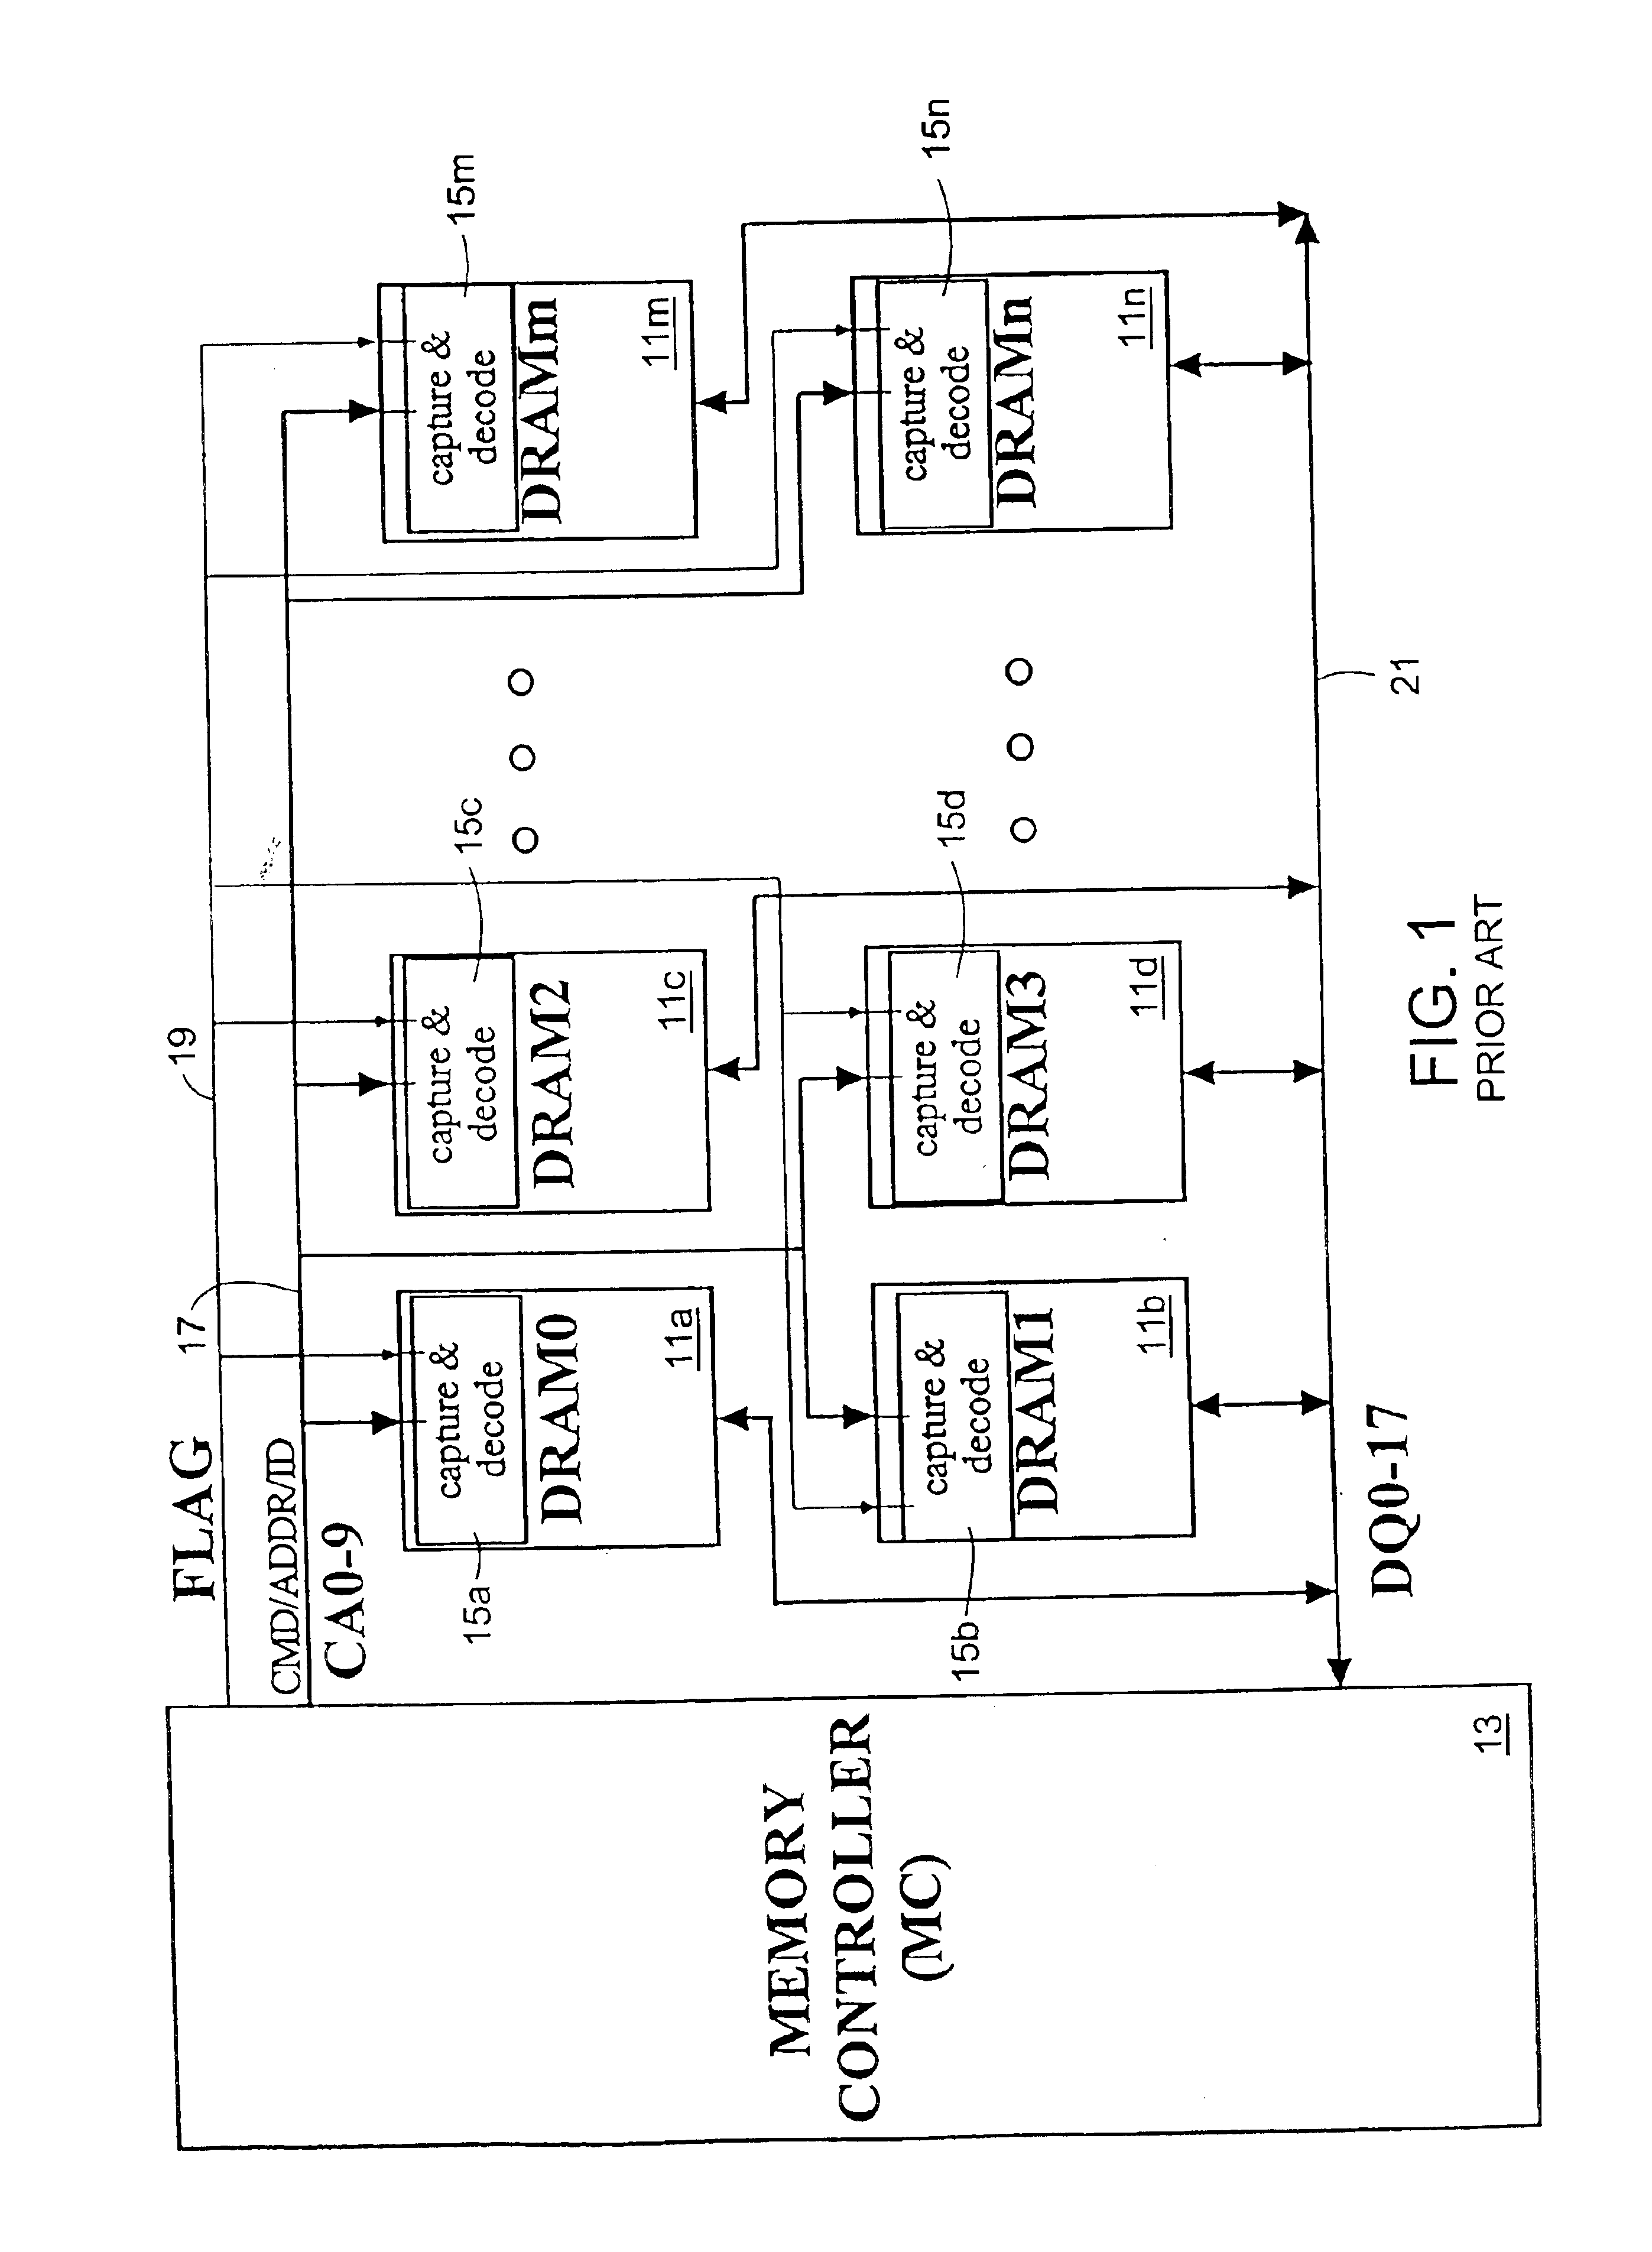 Method for selecting one or a bank of memory devices